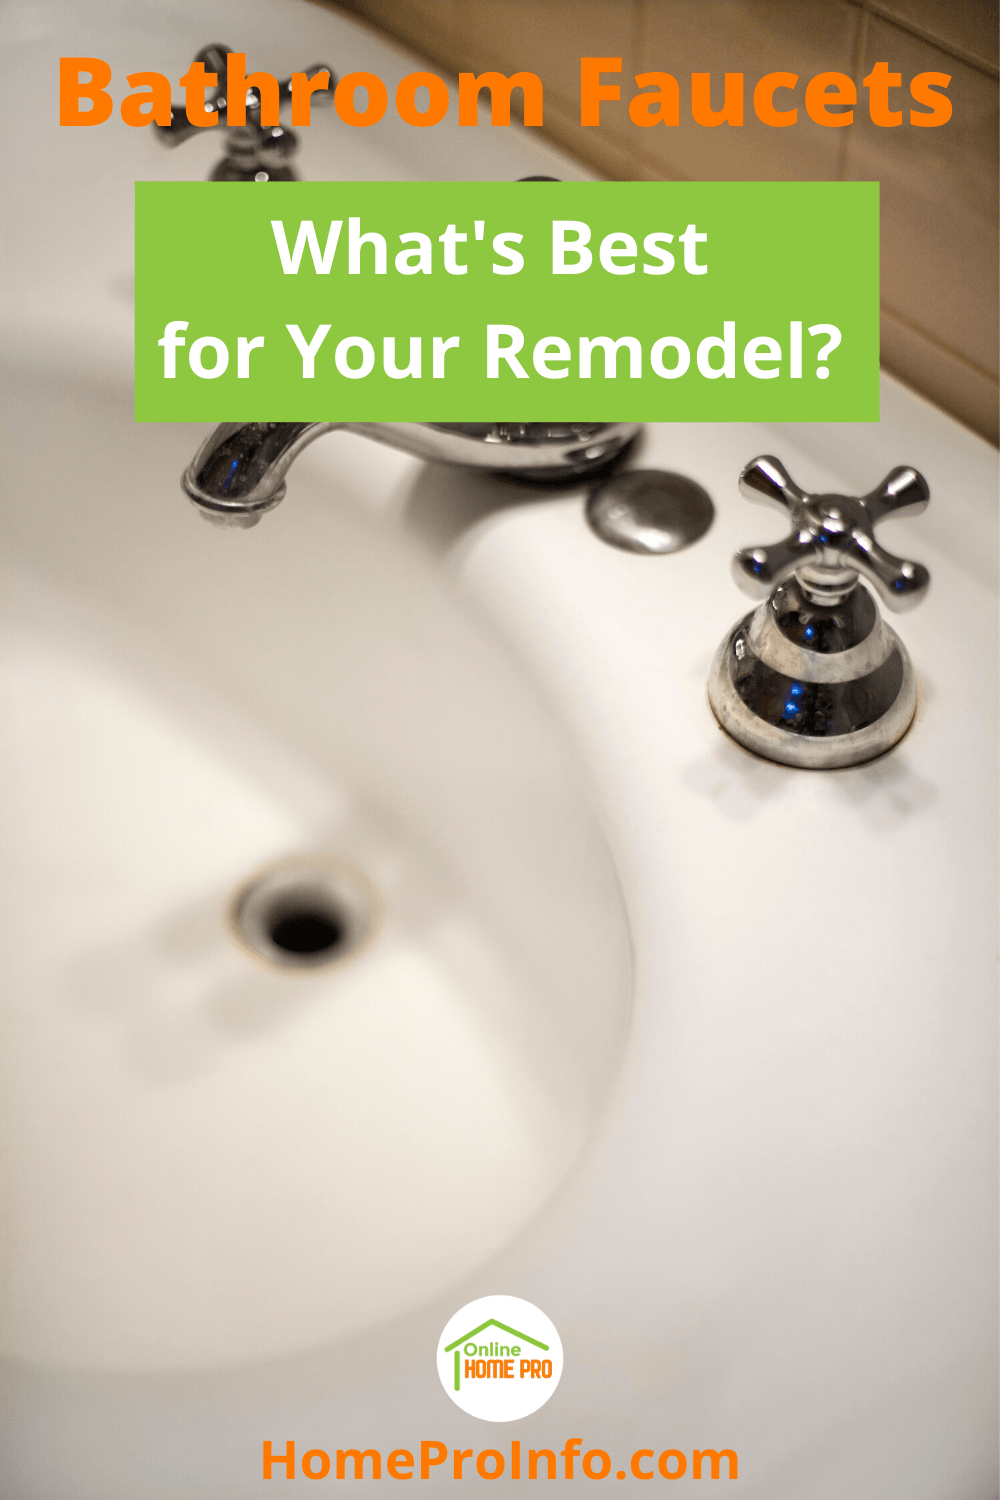 bathroom faucets and remodeling